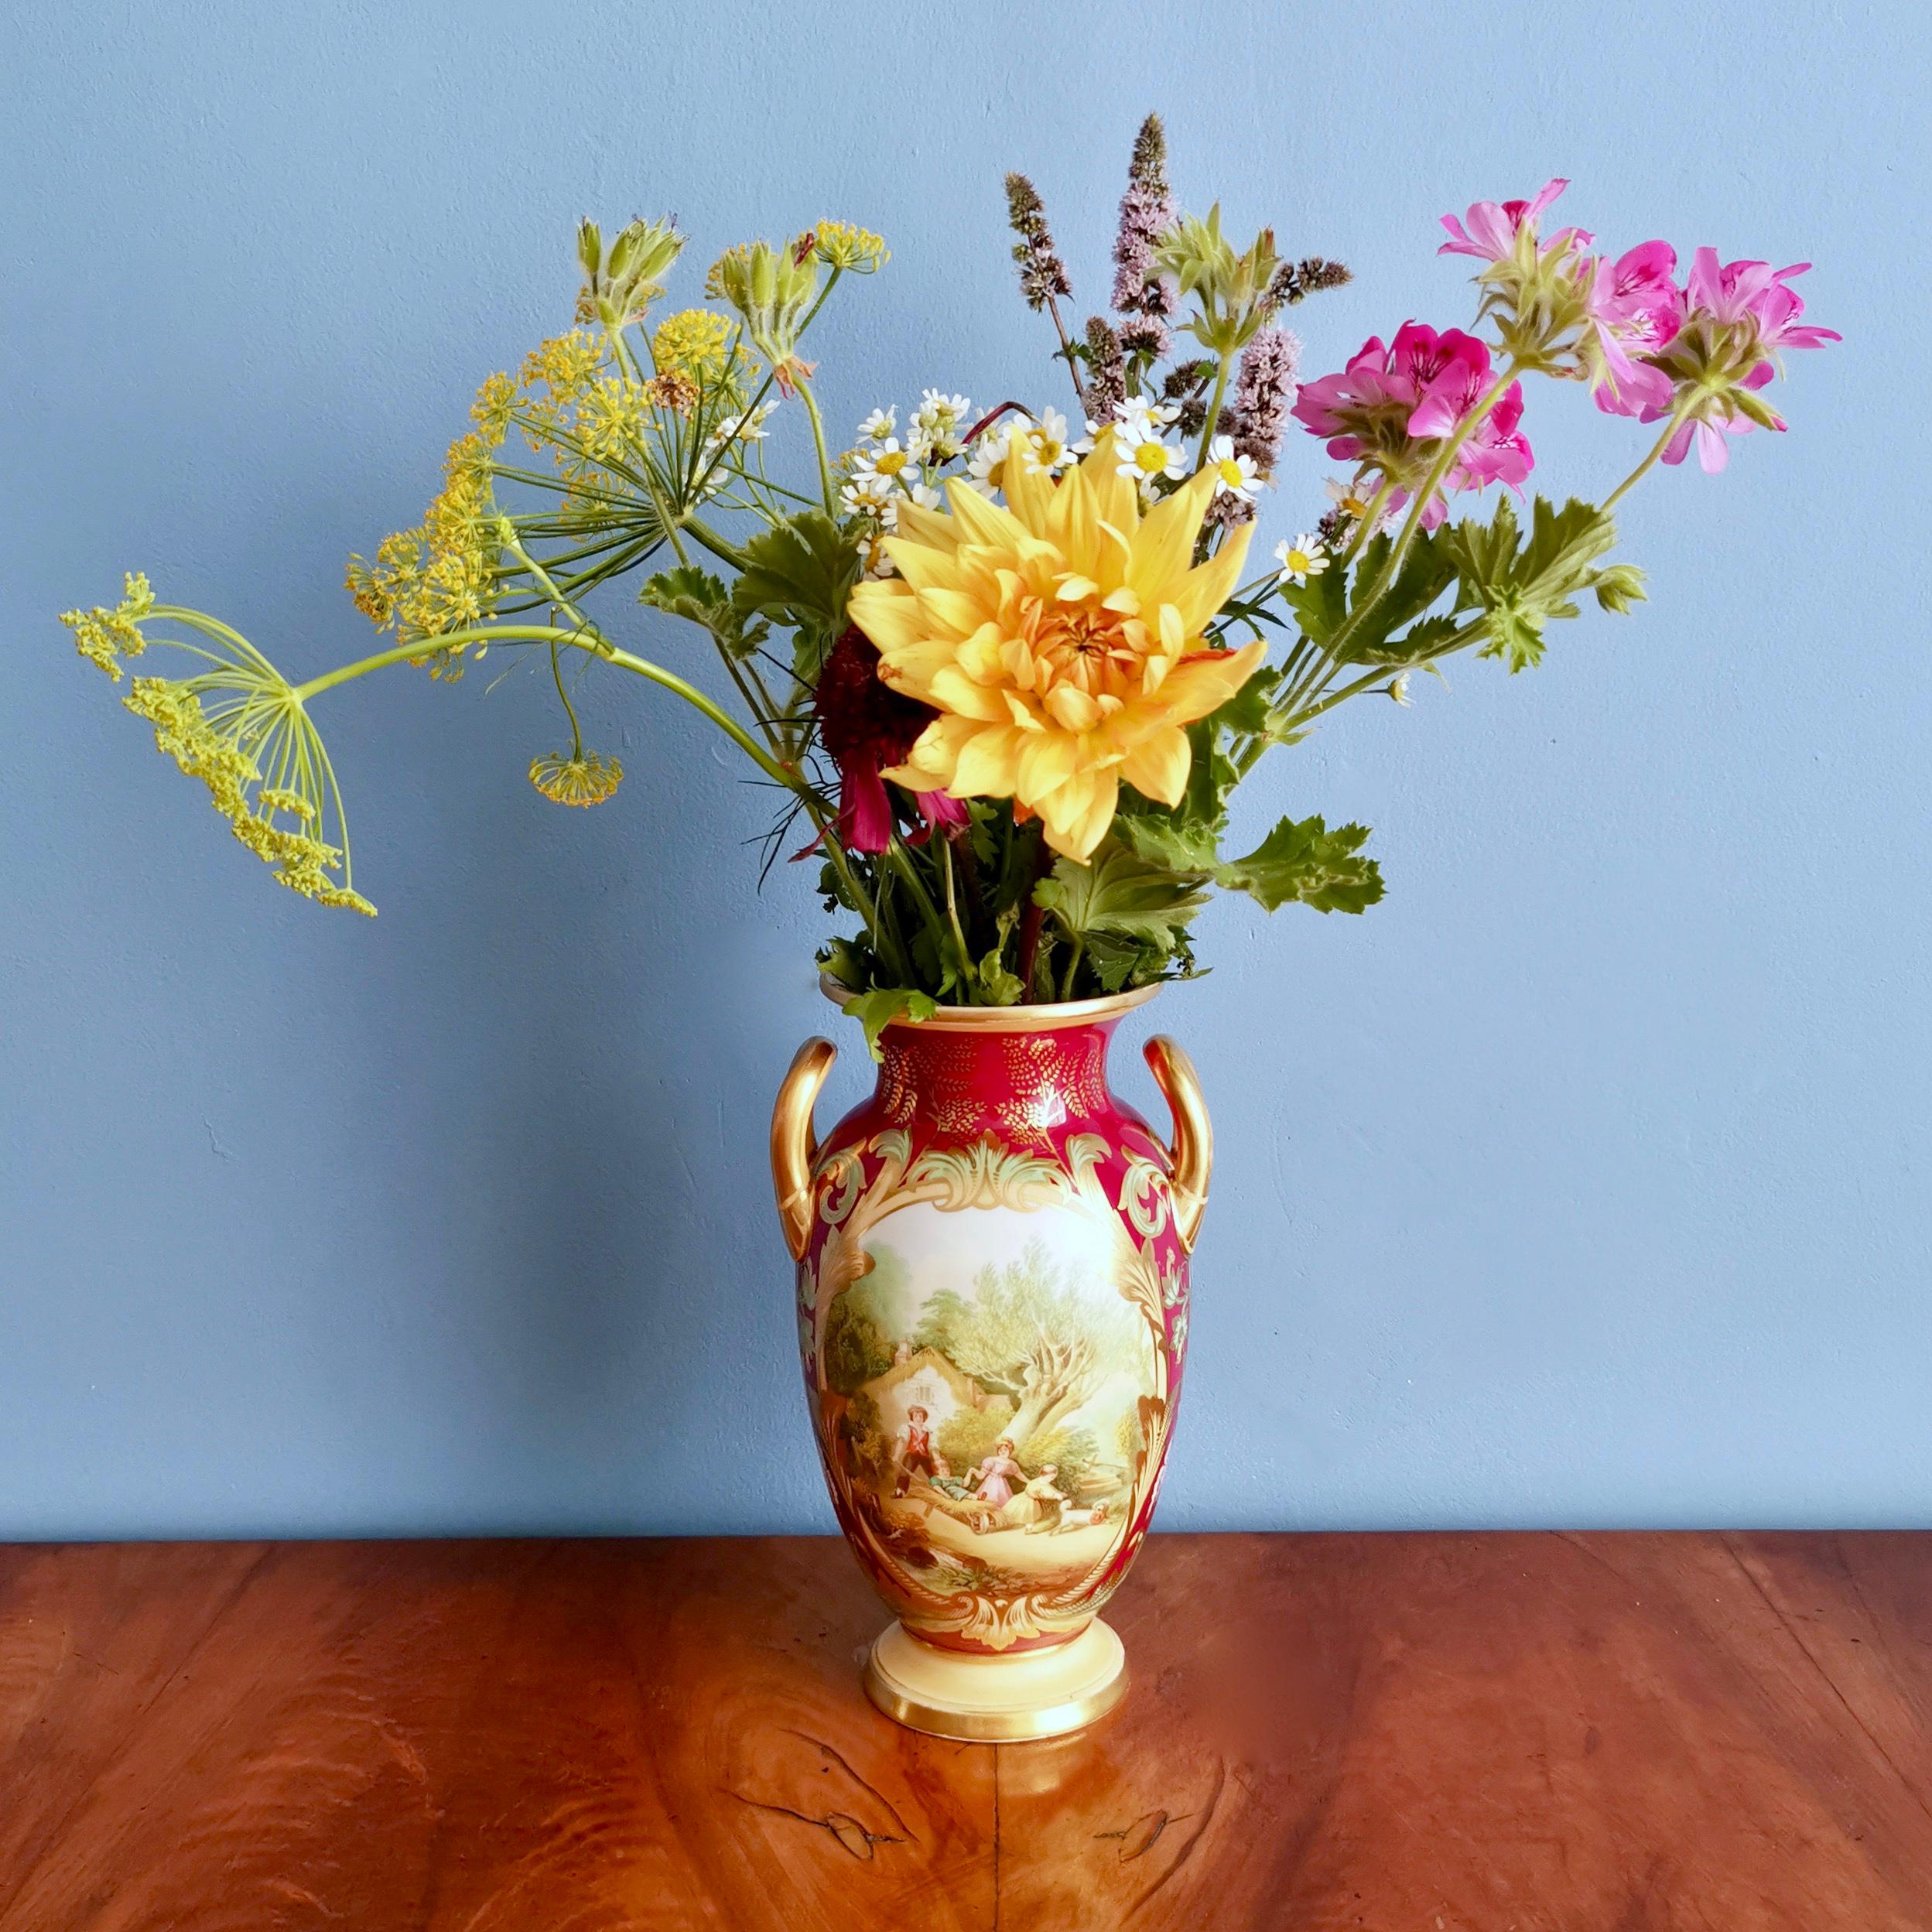 This is charming vase made by Samuel Alcock in circa 1850, which was the Victorian era. The vase has a deep maroon ground with a cheerful painting called 